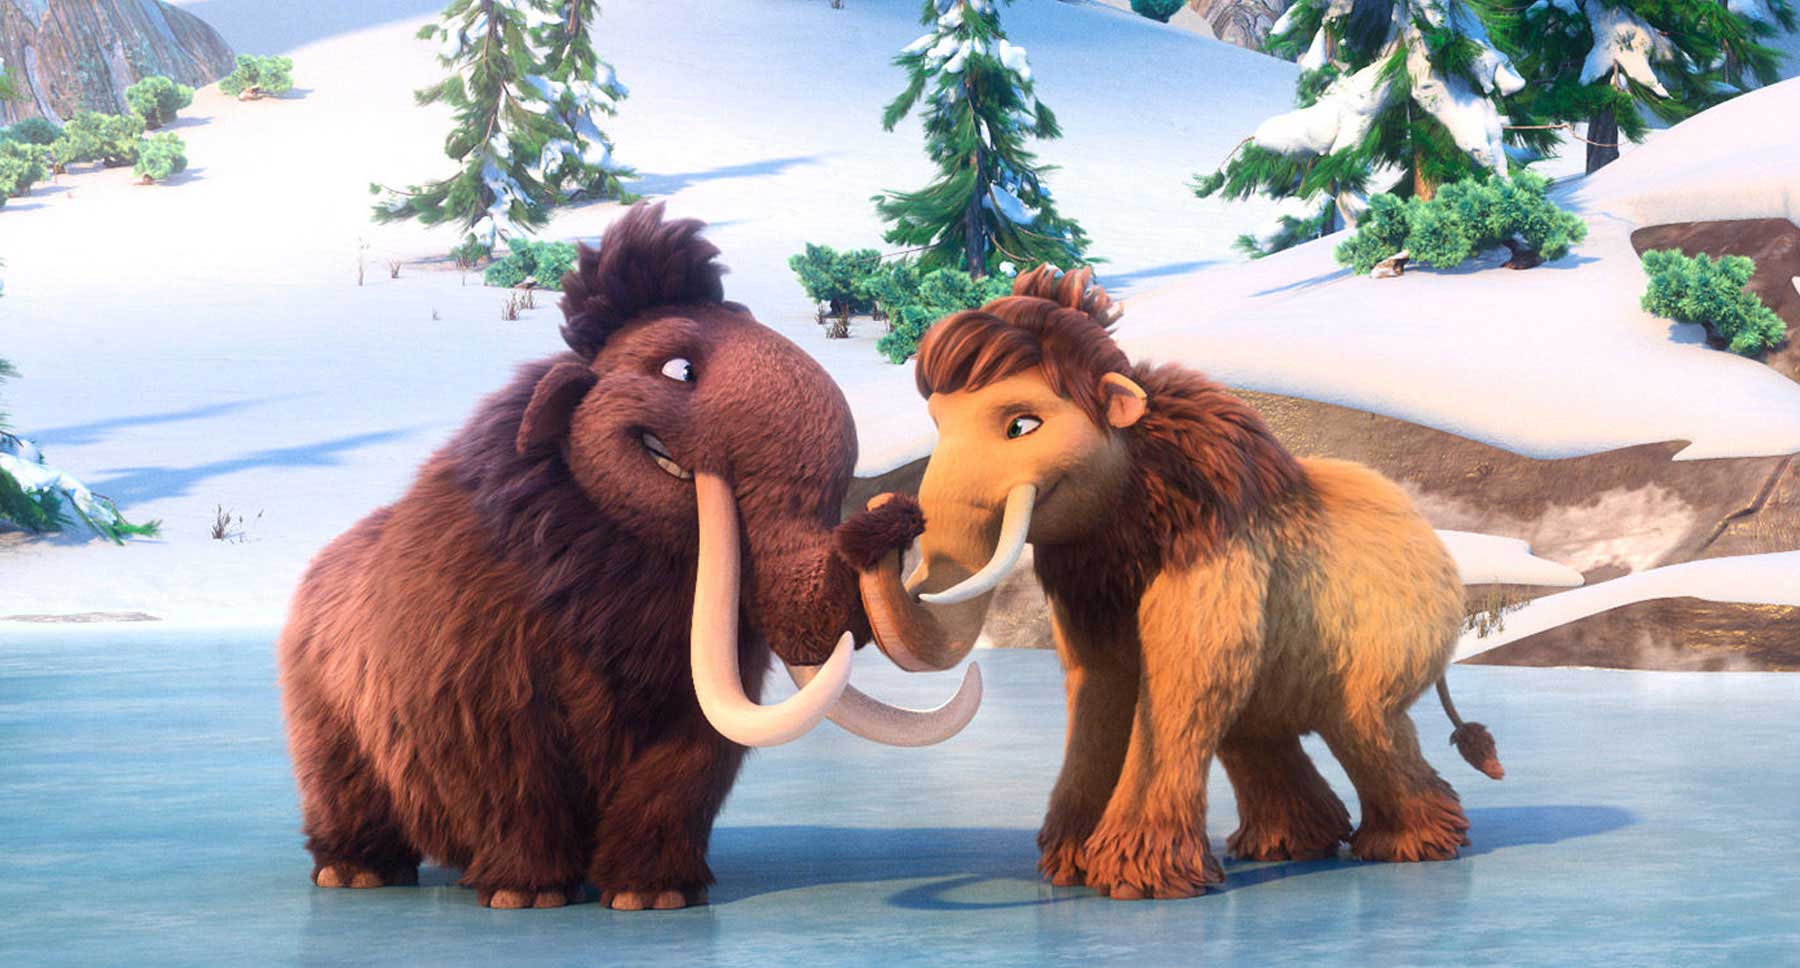 ice age 5 full movie online in english